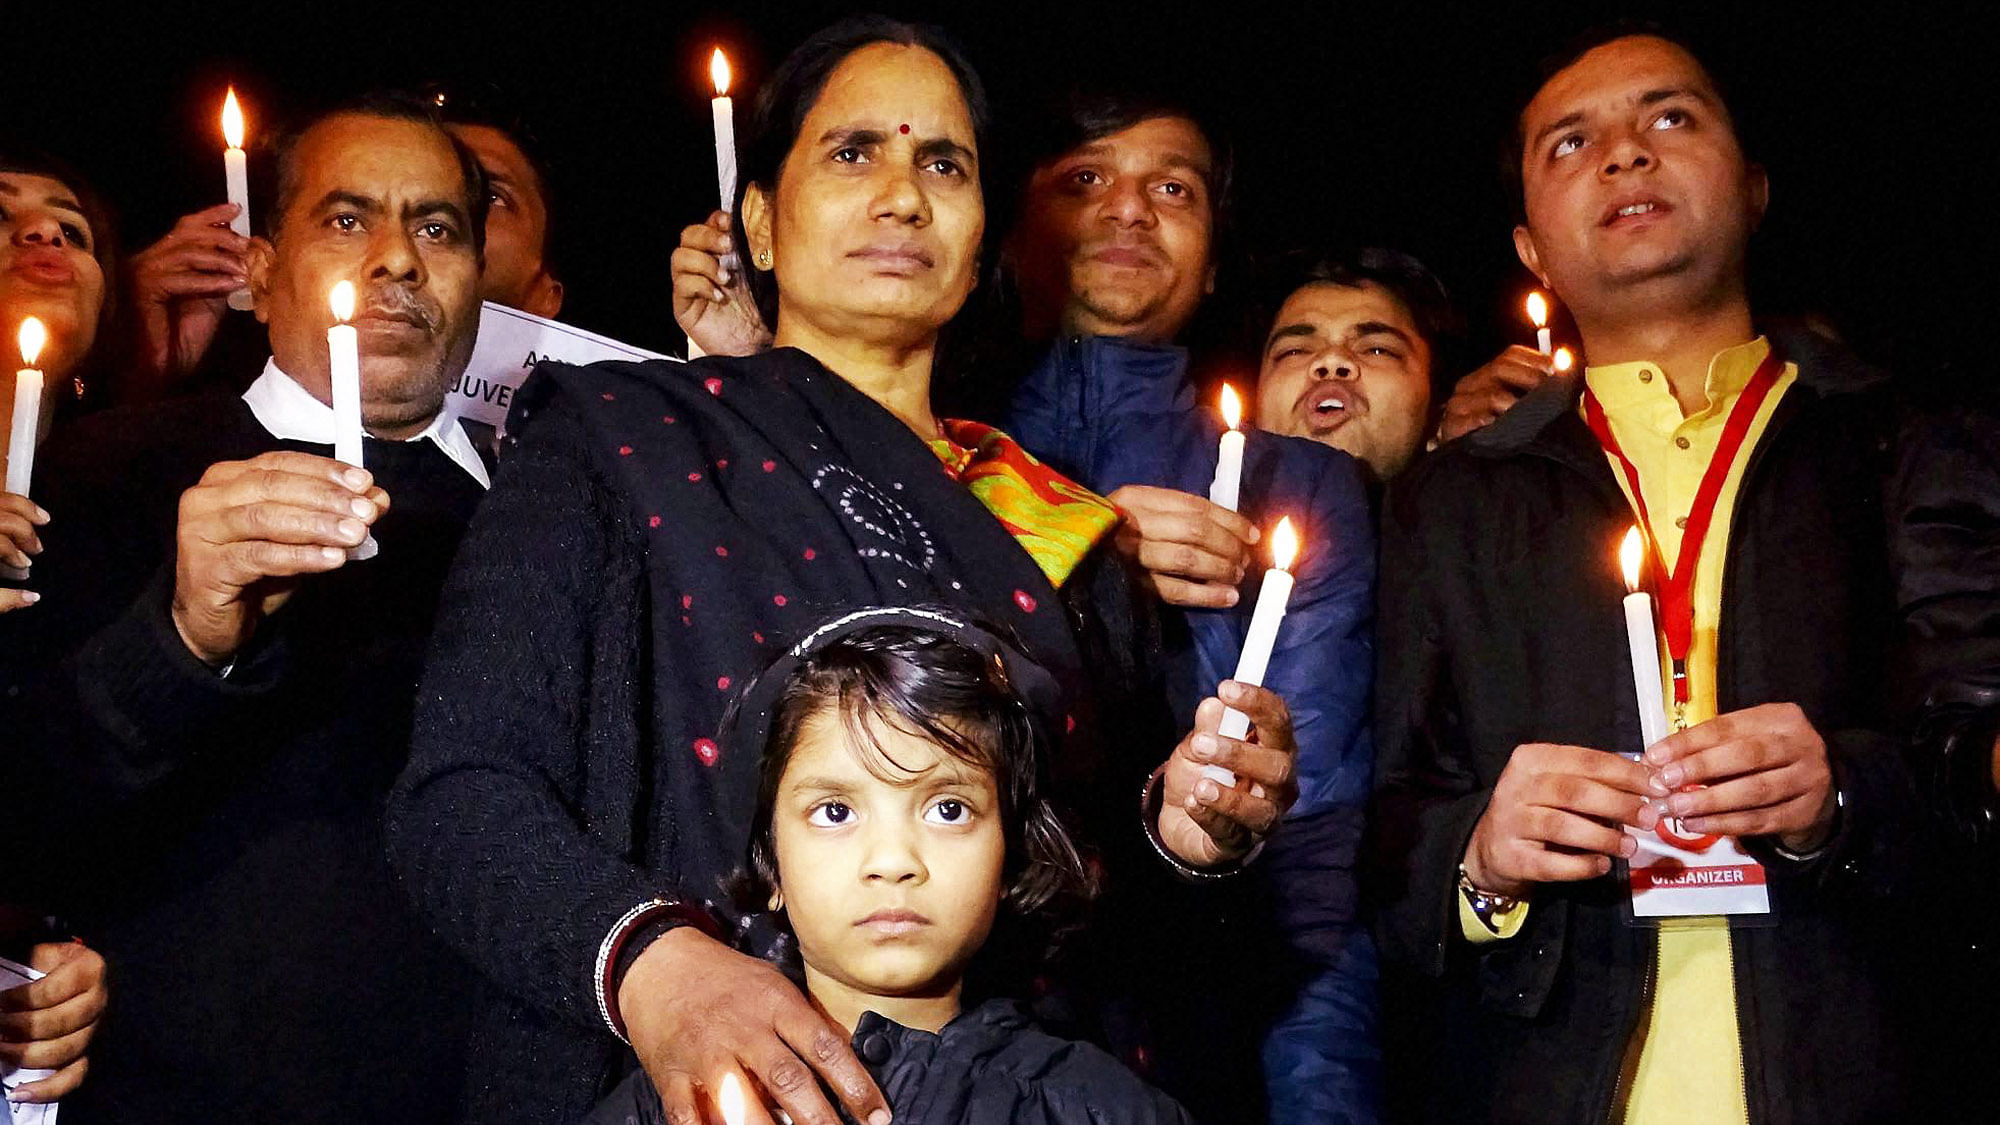 Asha Devi, the mother of December 16 gangrape victim Jyoti Singh also known as Nirbhaya, holds a candle at the vigil held for her daughter.  (Photo: PTI)